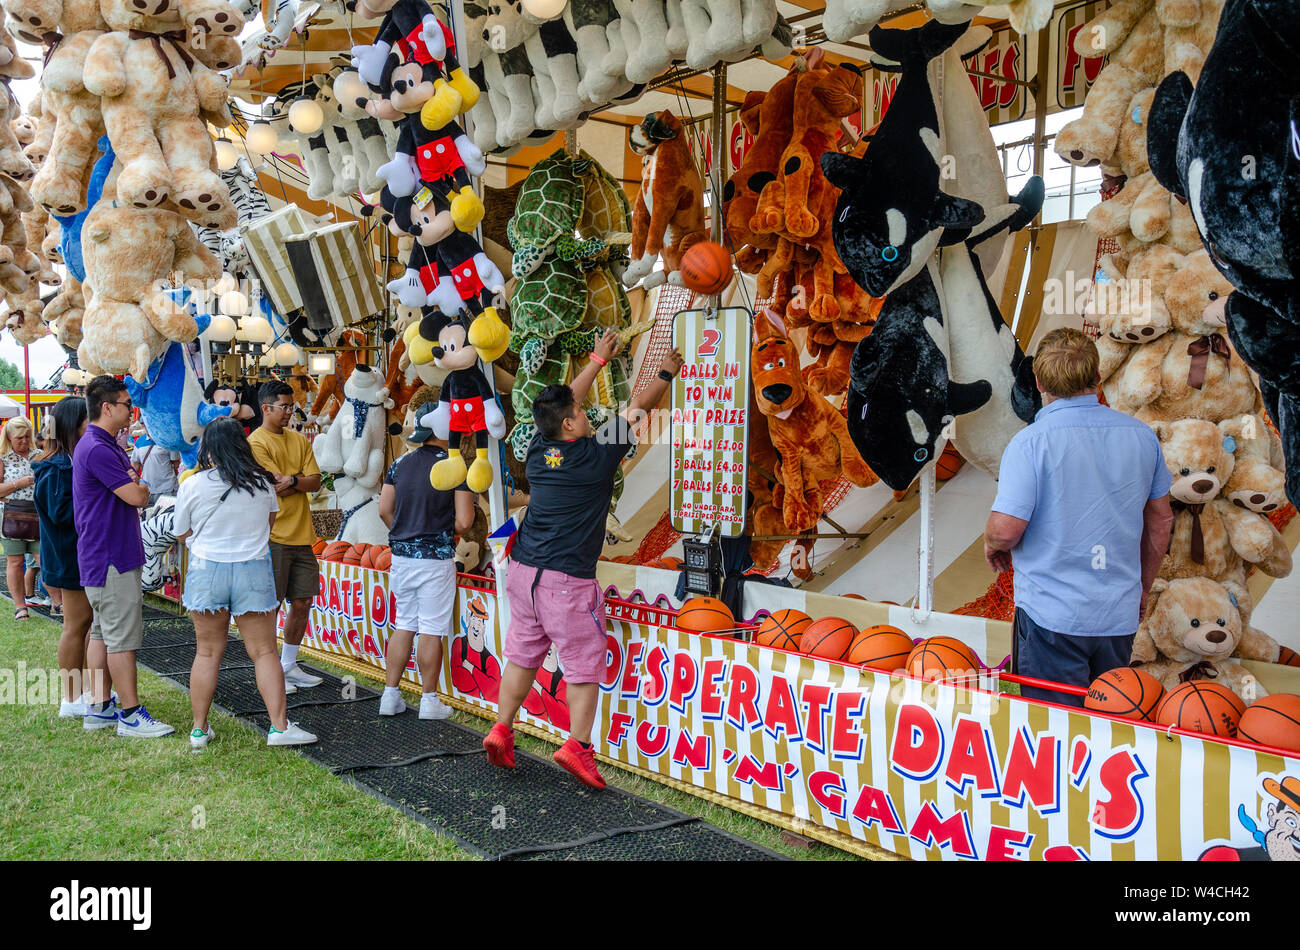 A fairground stall with lots of cuddly toys as prizes to entice players. You win by scoring baskets with a basket ball. Stock Photo